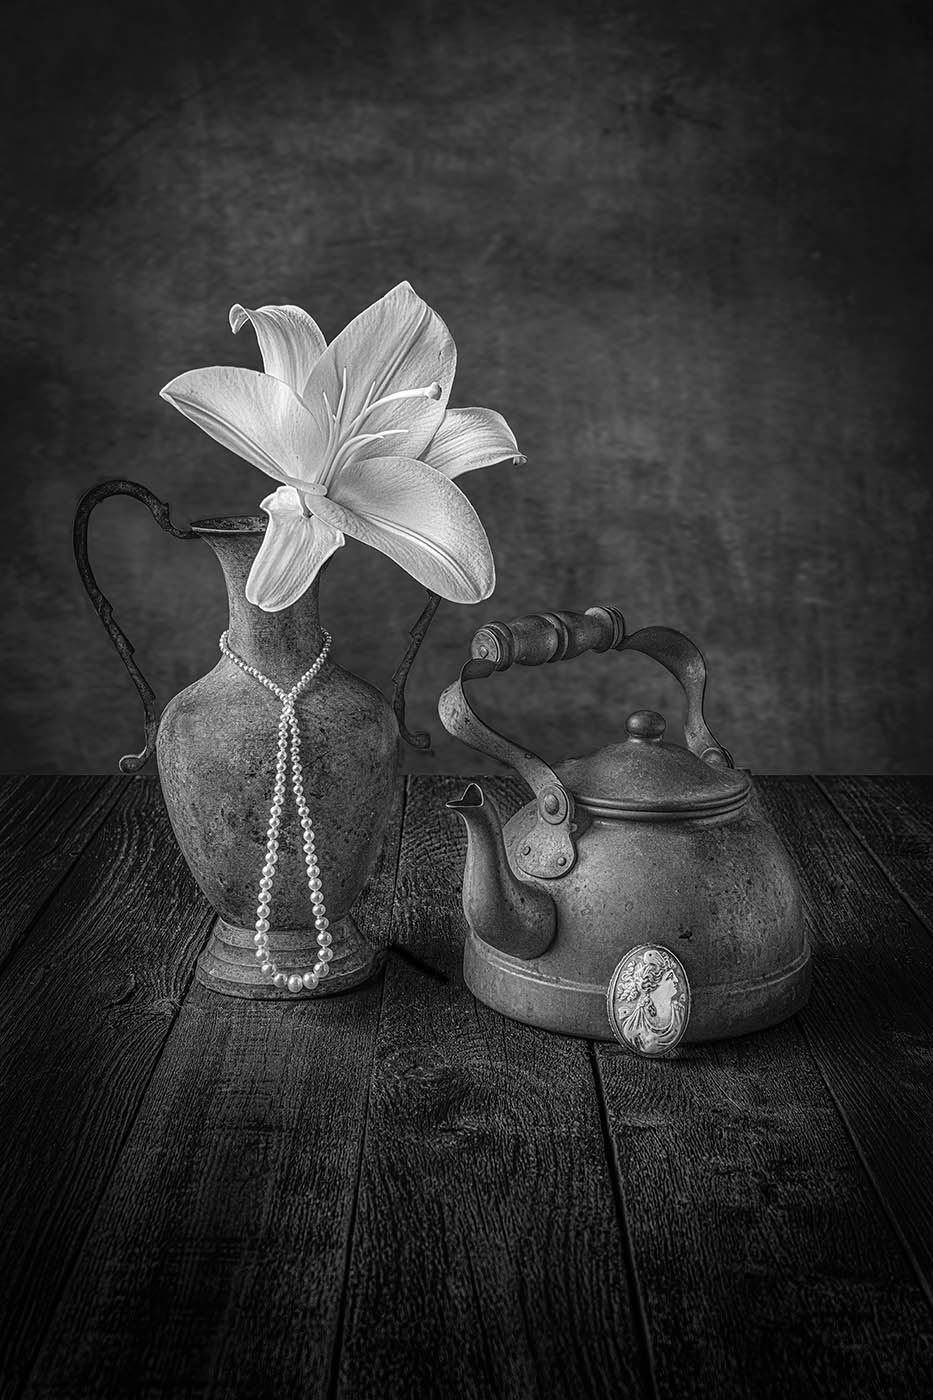 Flower Teapot Pearls by Ed Ries